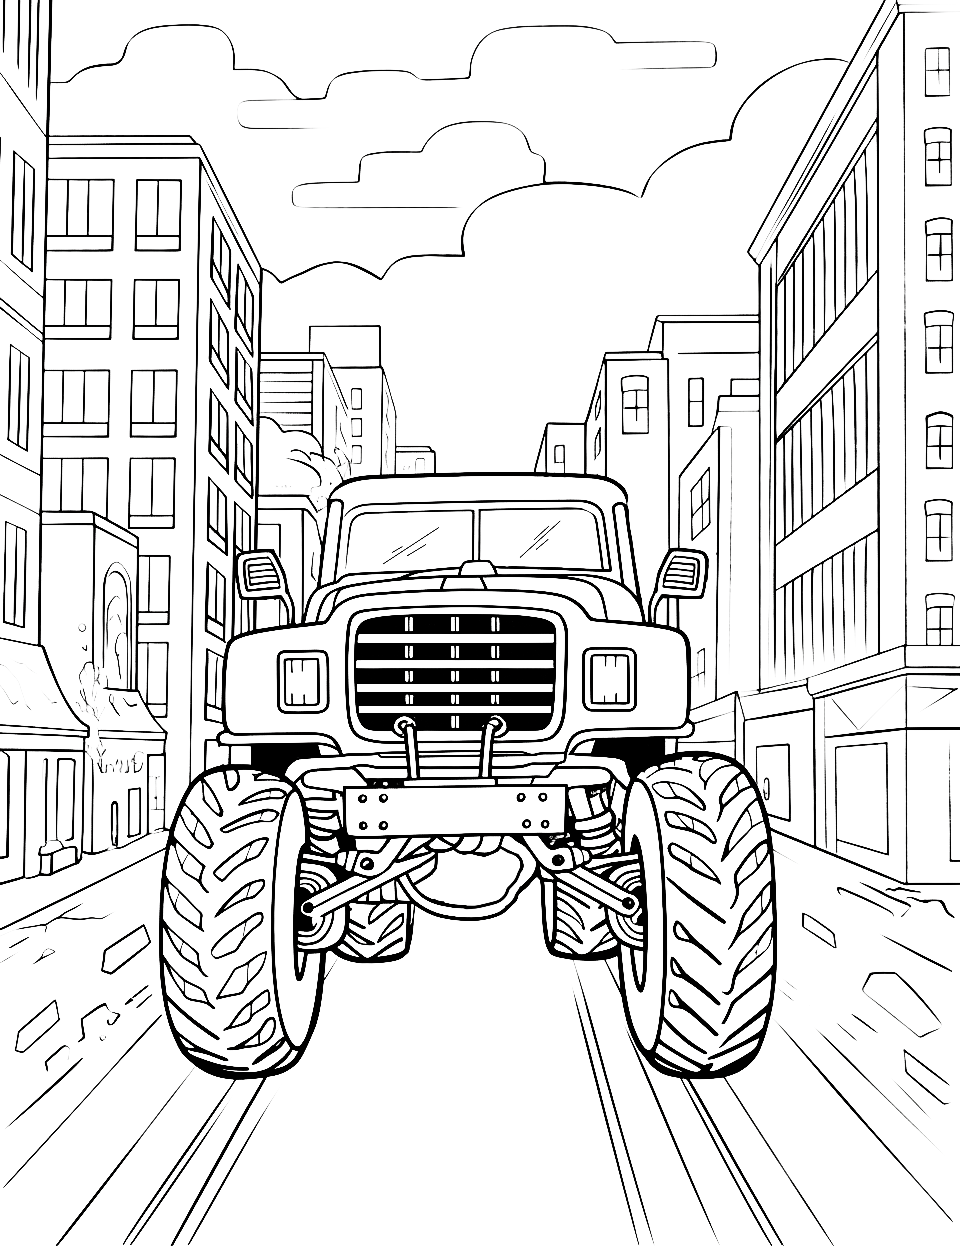 City Street Showdown Monster Truck Coloring Page - Monster truck navigating through a city’s narrow streets.